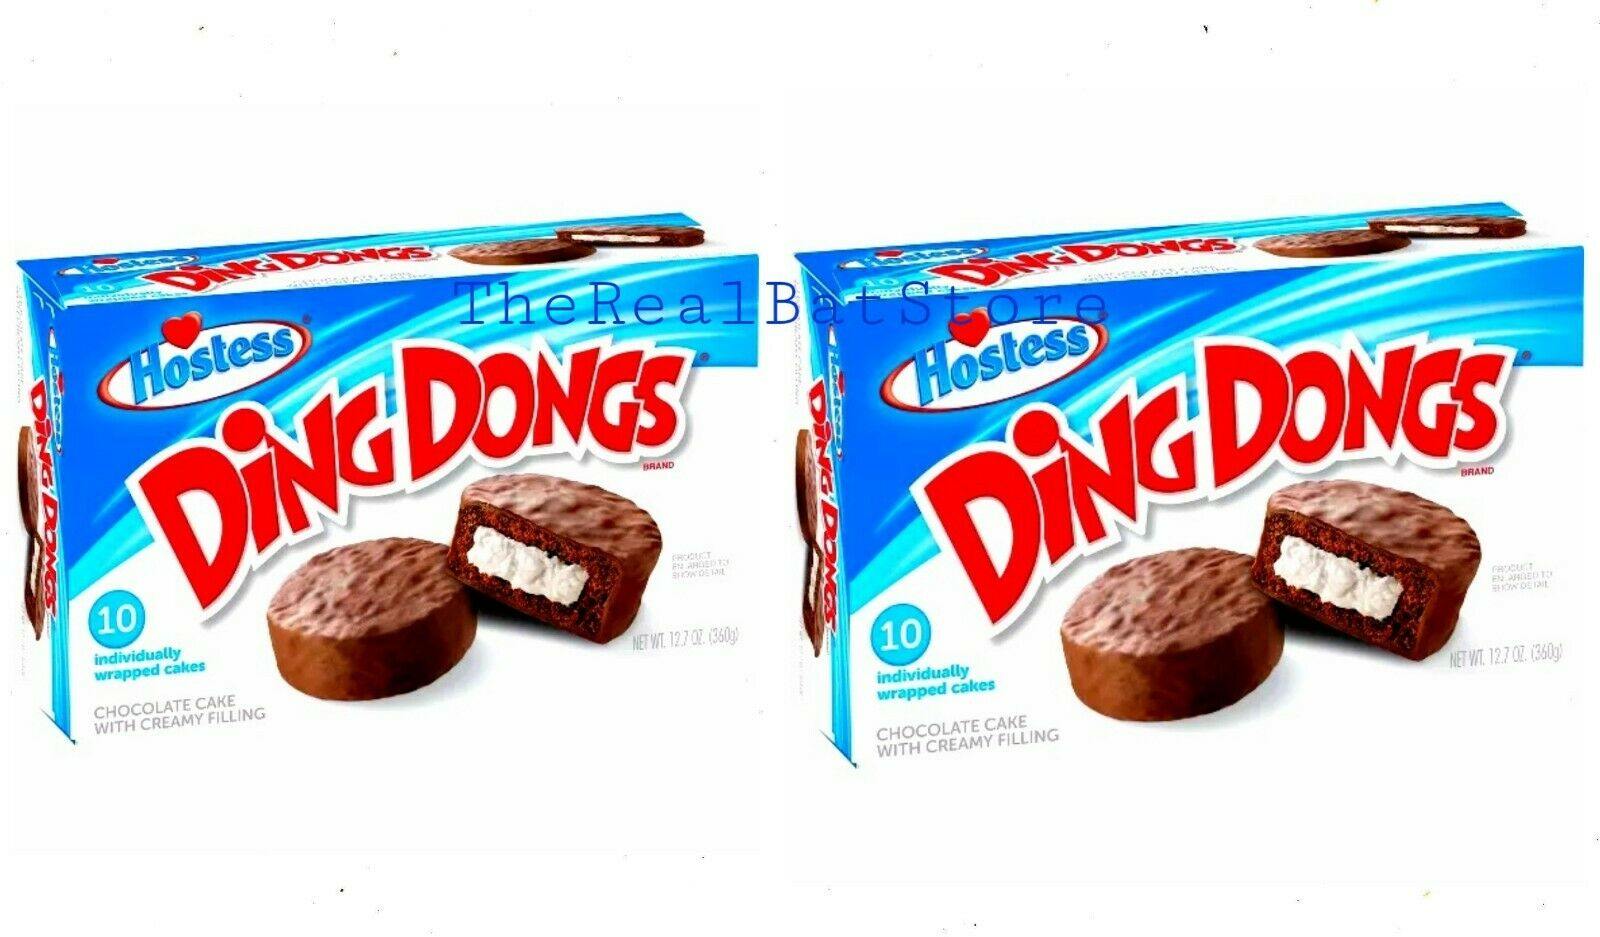 Hostess Chocolate Ding Dongs Snack Cakes - 12.70 oz, 10 Count